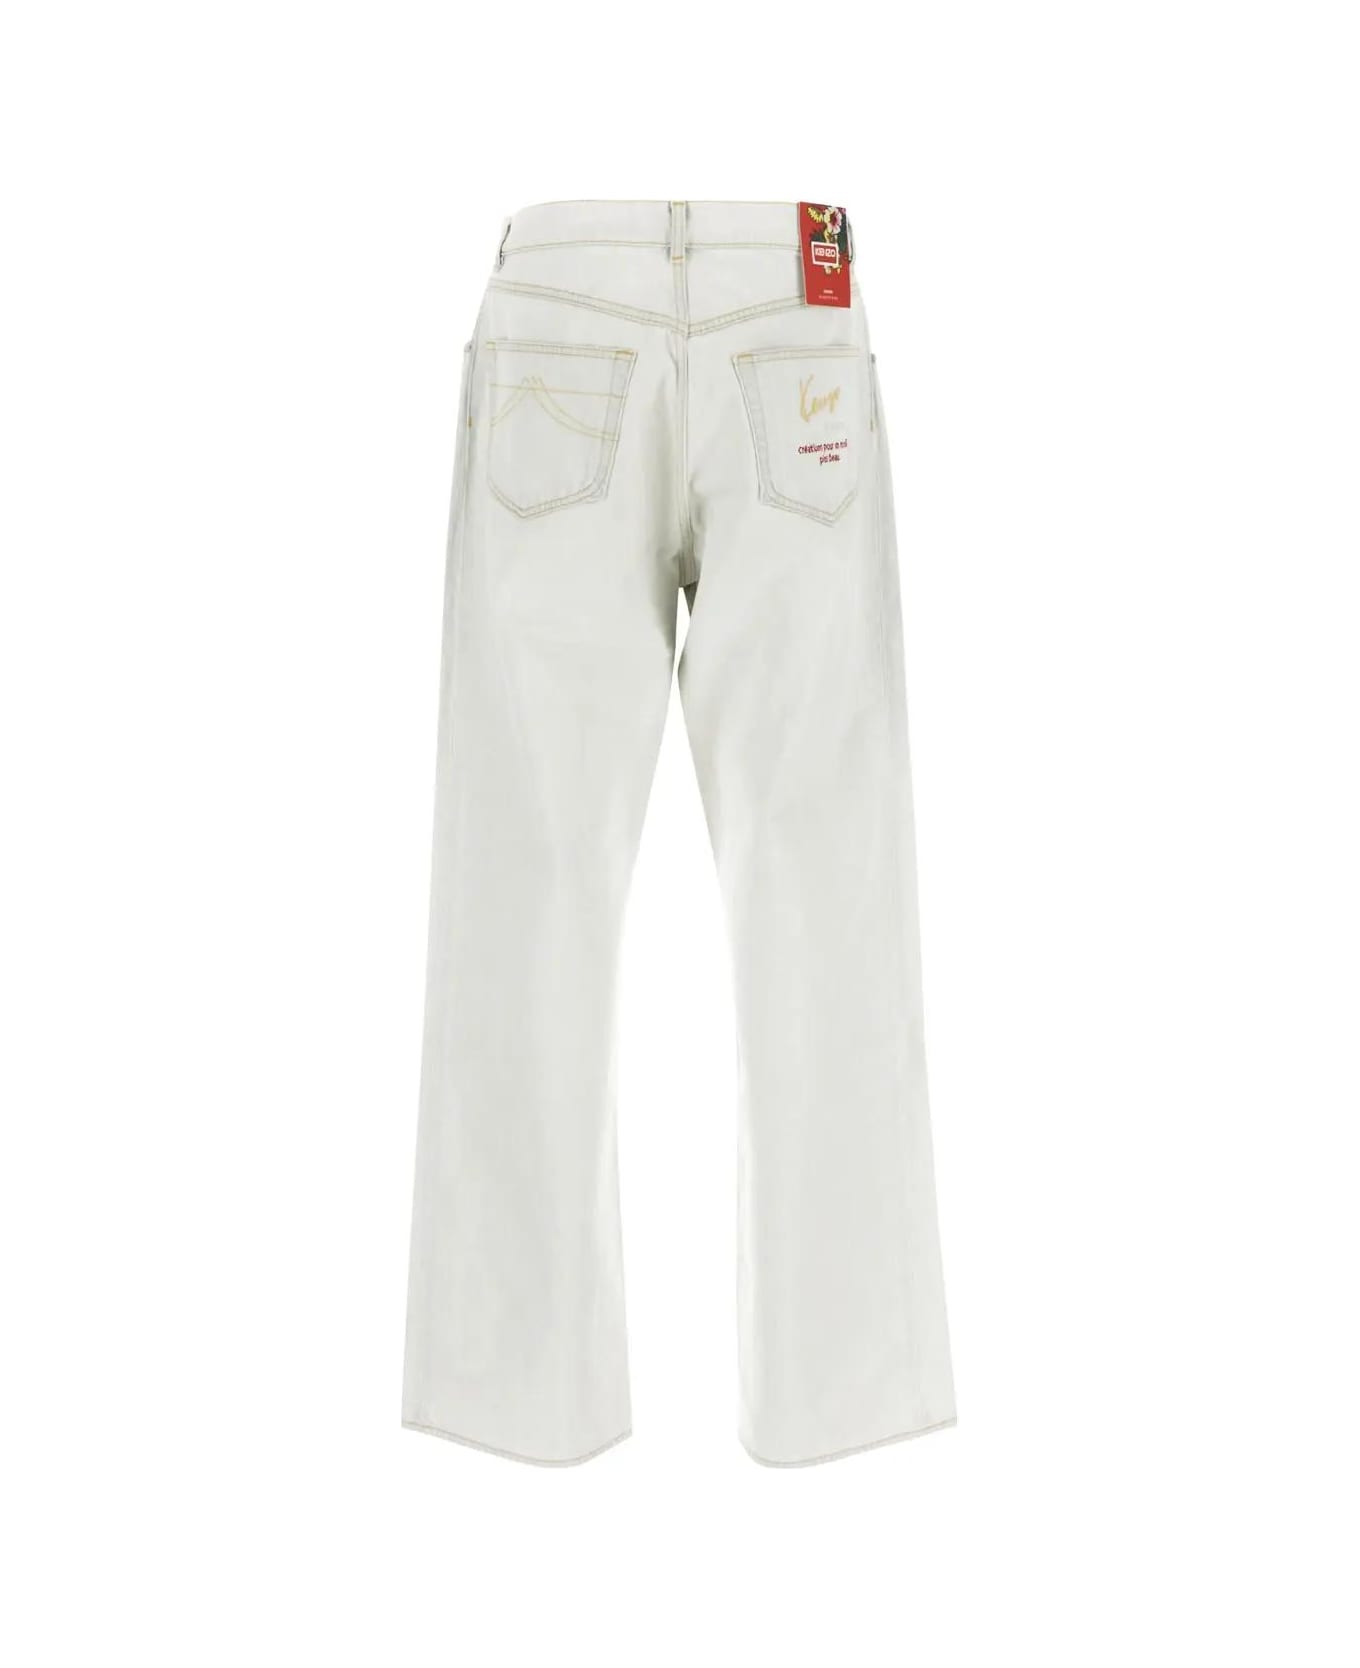 Kenzo Bleached Suisen Relaxed Jeans - BLEACHED DENIM